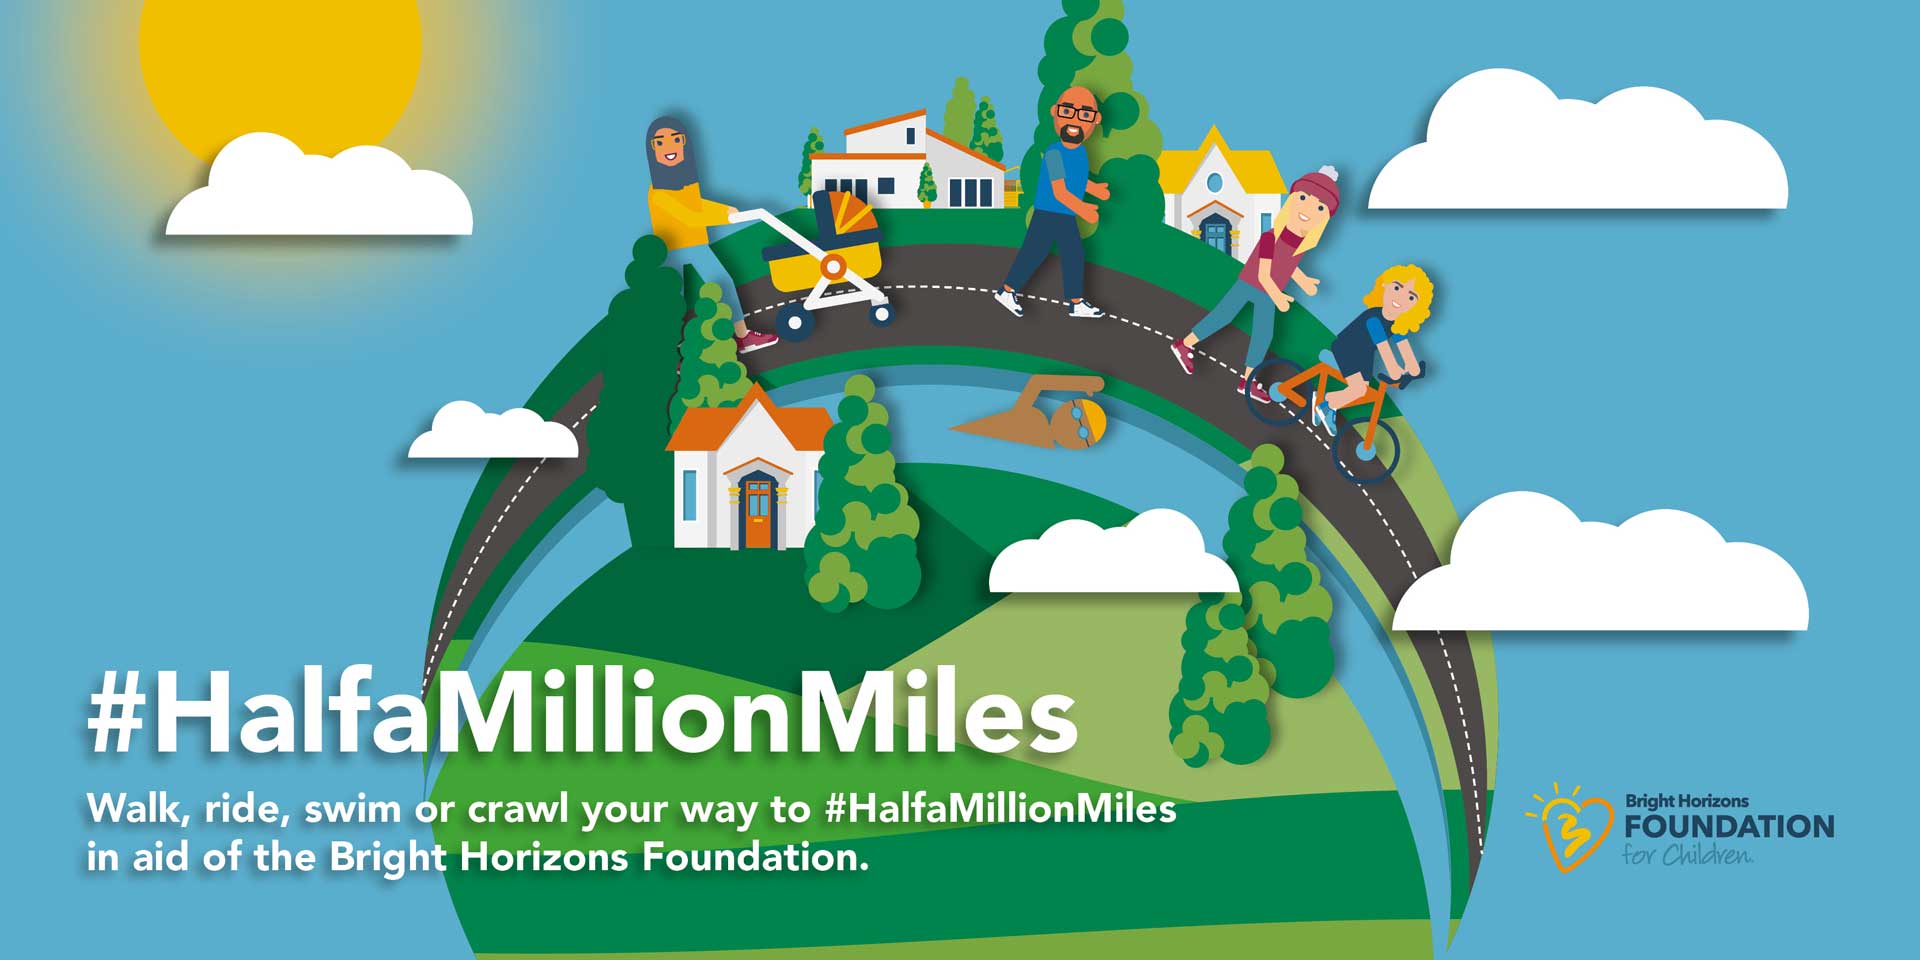 An illustration of a globe with various people either walking, cycling or swimming. Text on the image says "#HalfaMillionMiles - Walk, ride, swim or crawl your way to #HalfaMillionMiles in aid of the Bright Horizons Foundation."